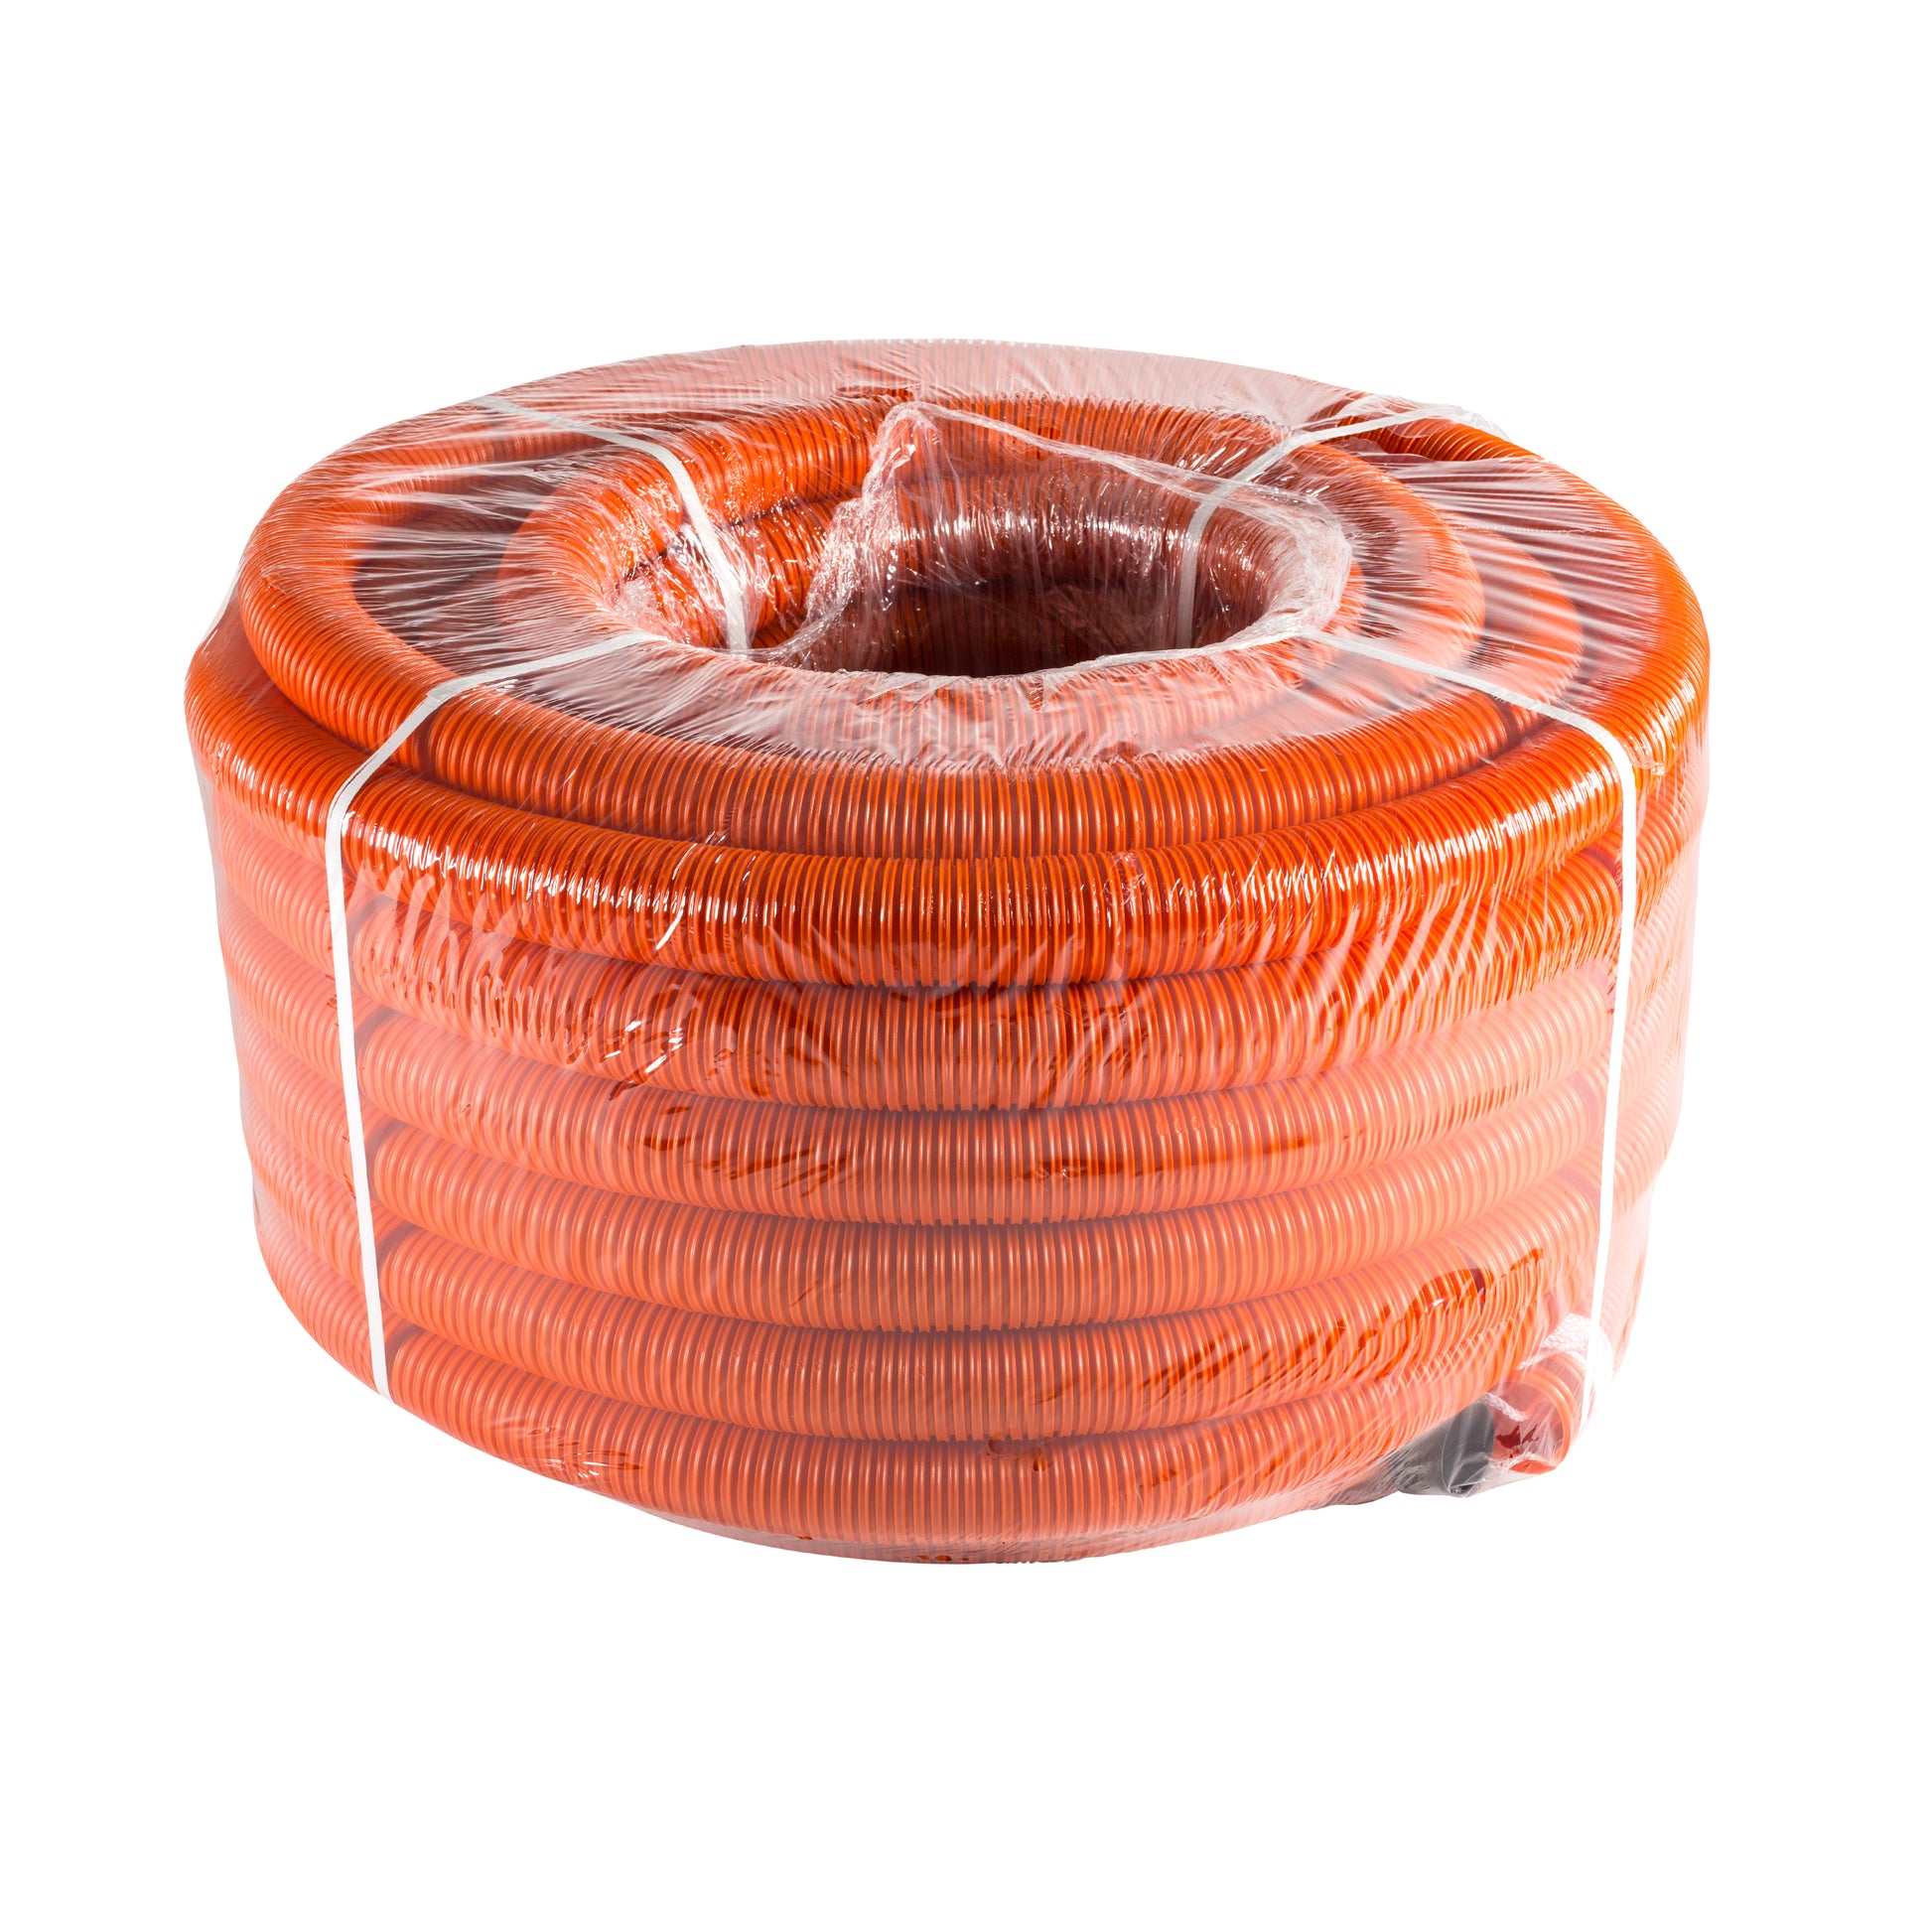 DCPC200-H150 DirectConnect™, 2 Conduit, 150', w/Pull String, Orange HDPE,  for Low Voltage Wire